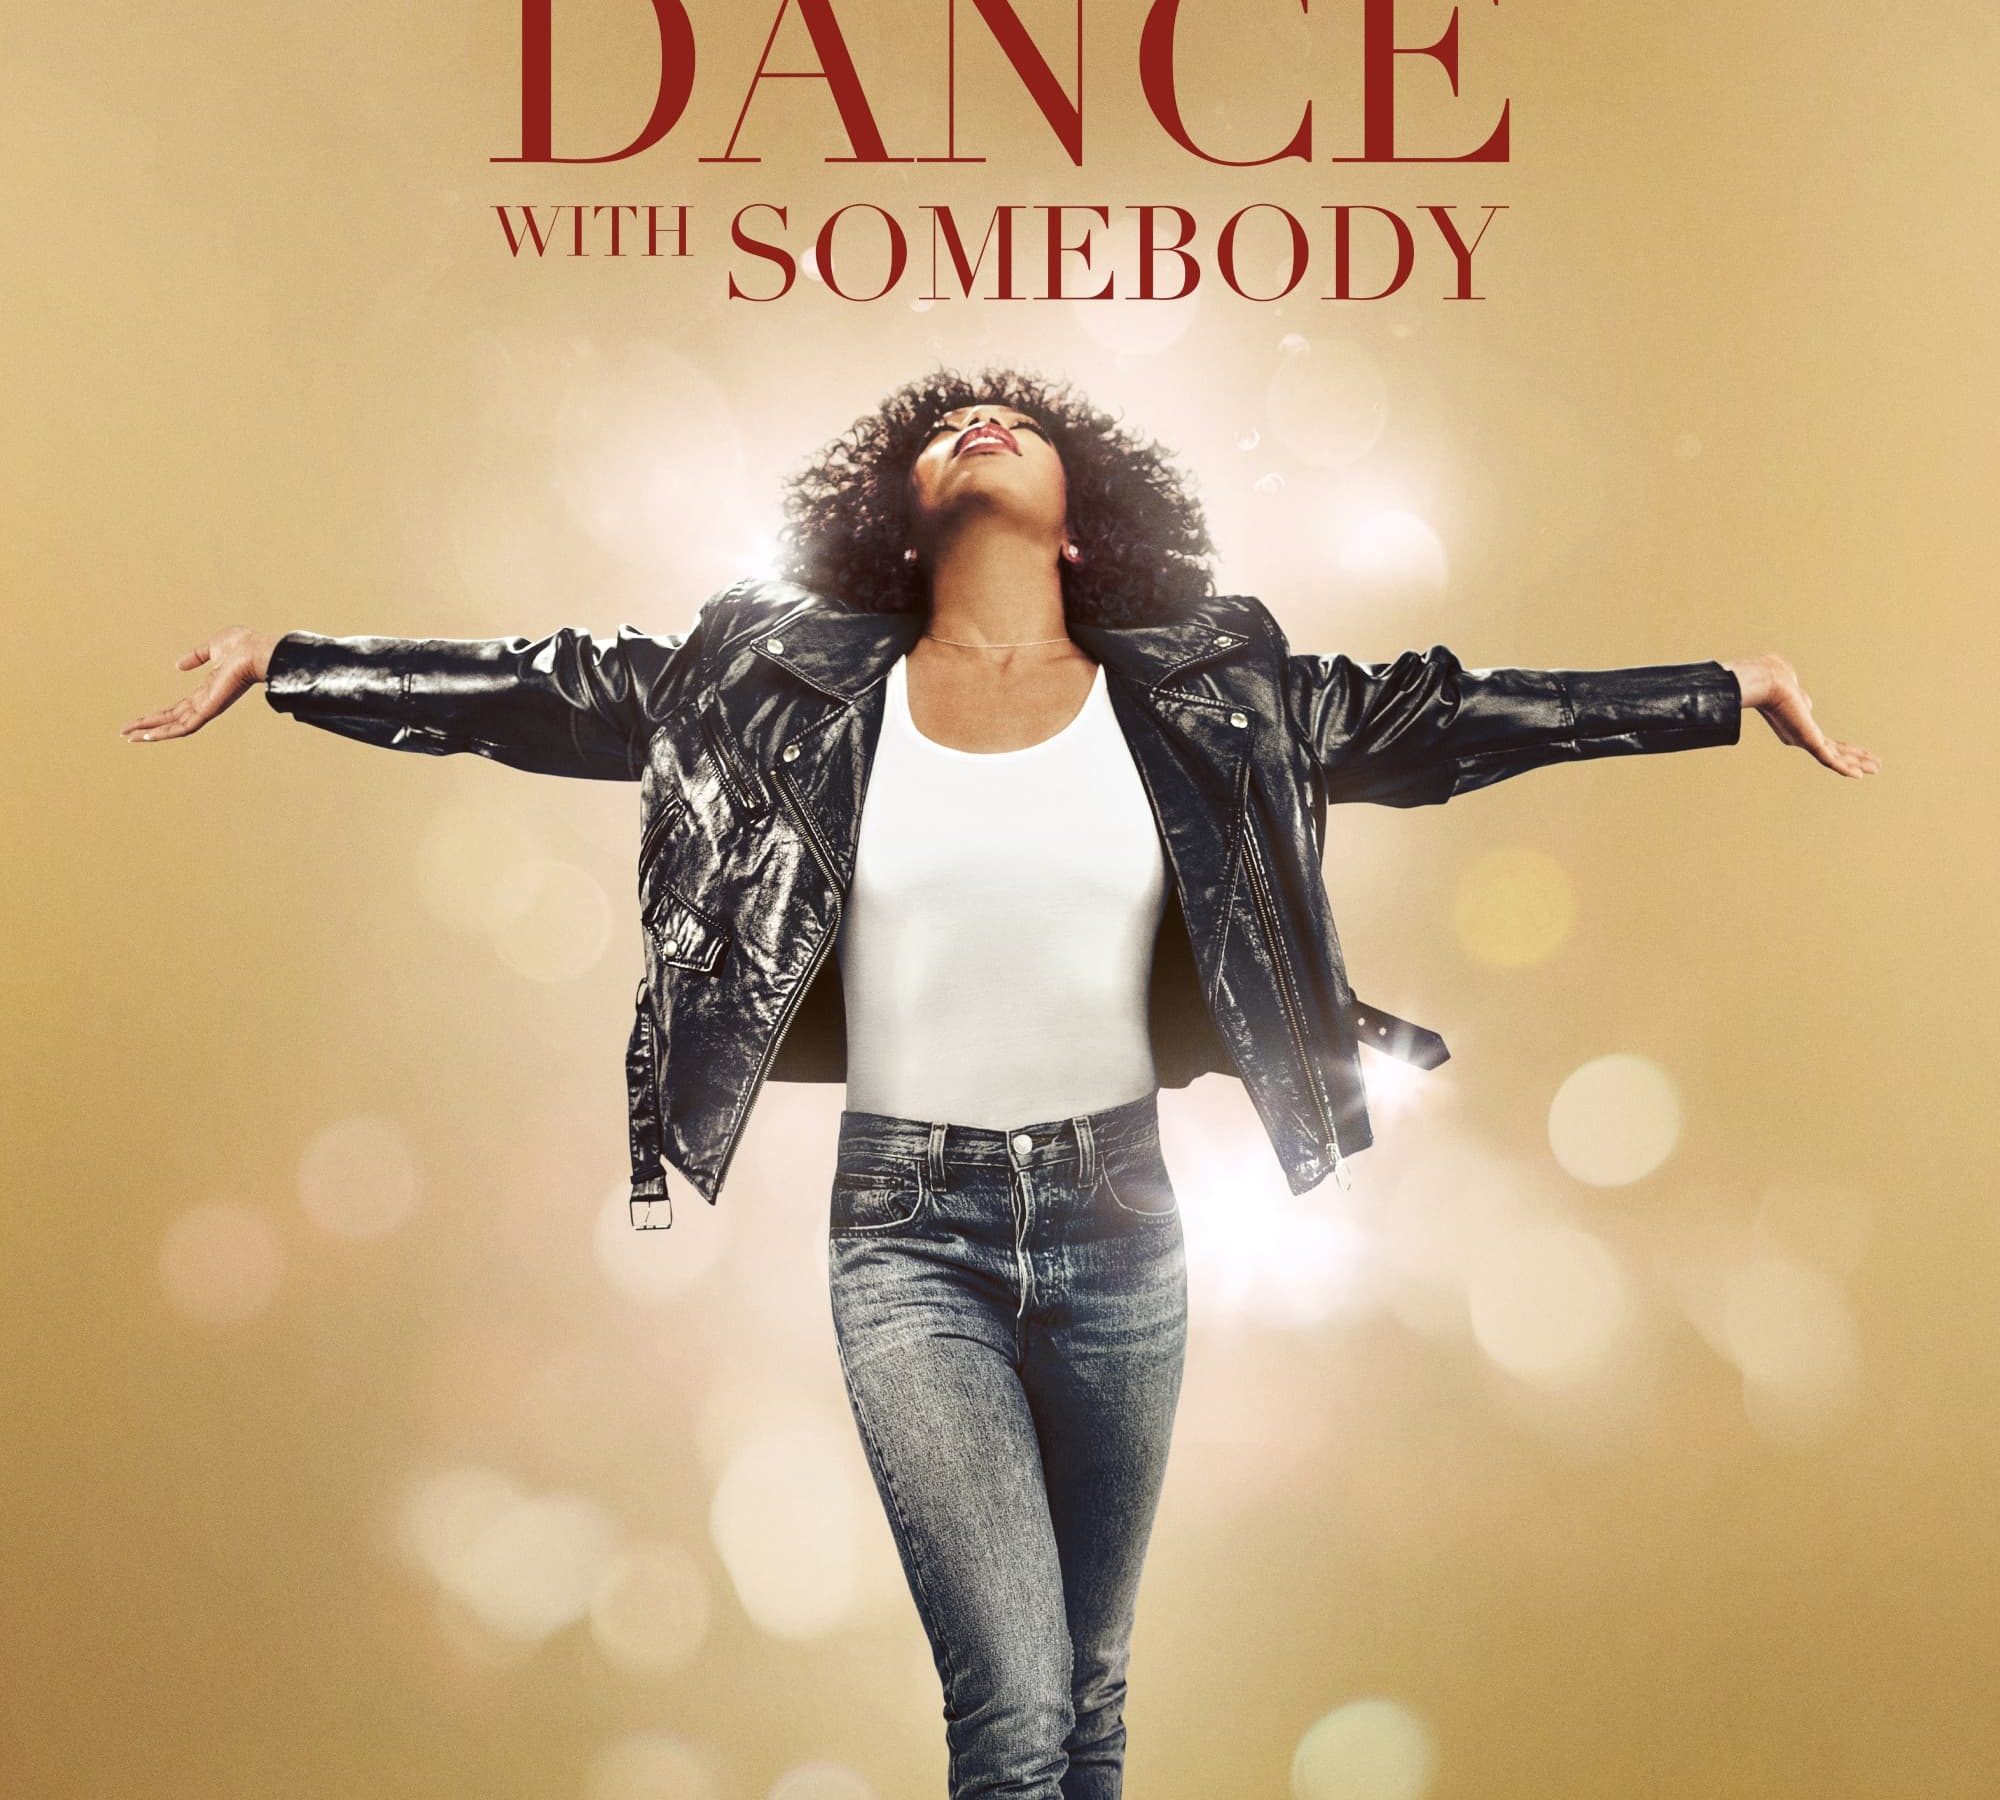 Poster for the movie "I Wanna Dance with Somebody"